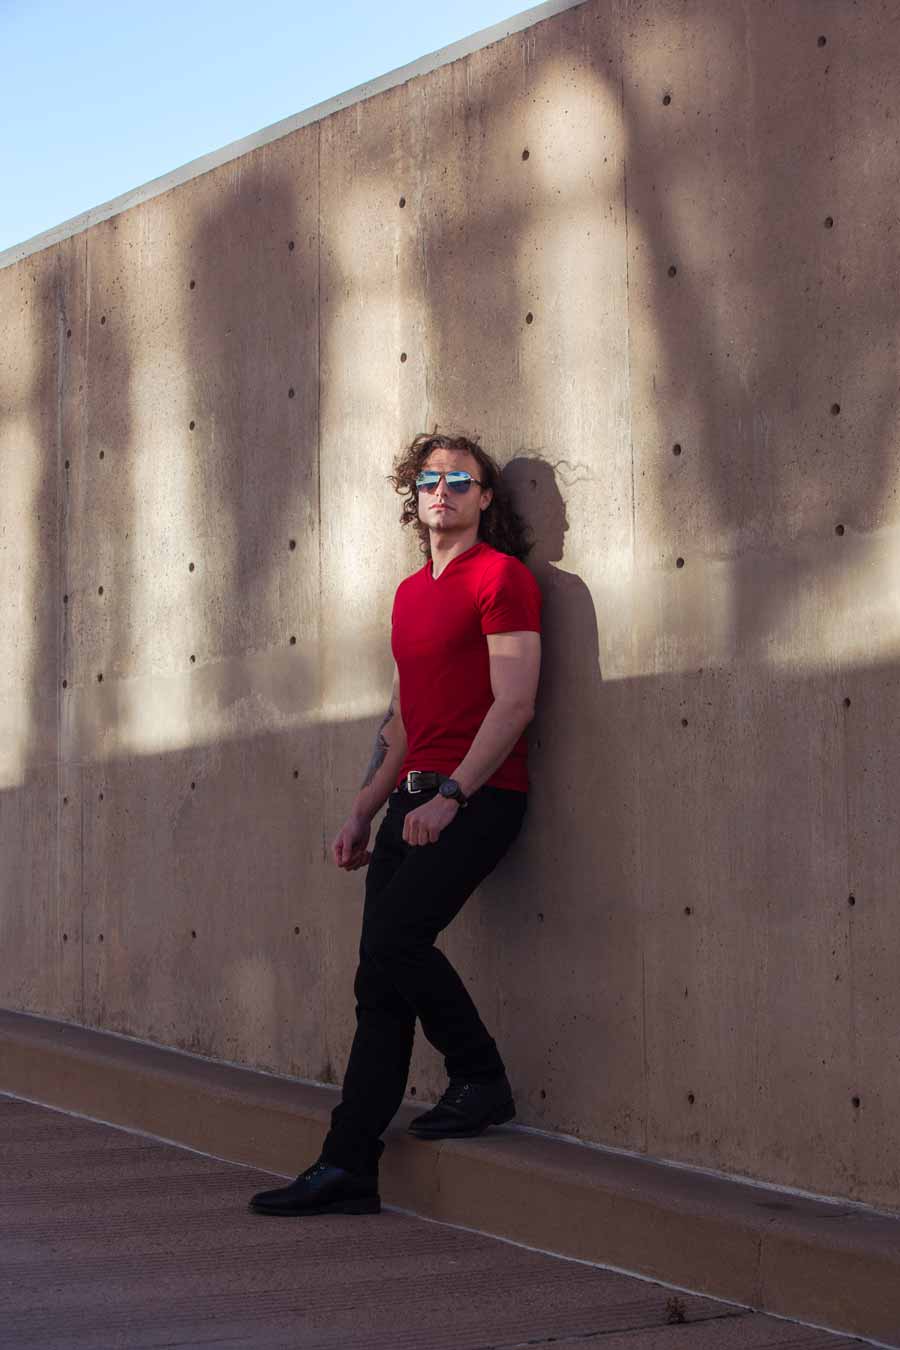 white male fashion photography model in denver in his twenties with shoulder length curly hair aviator sunglass and a red shirt